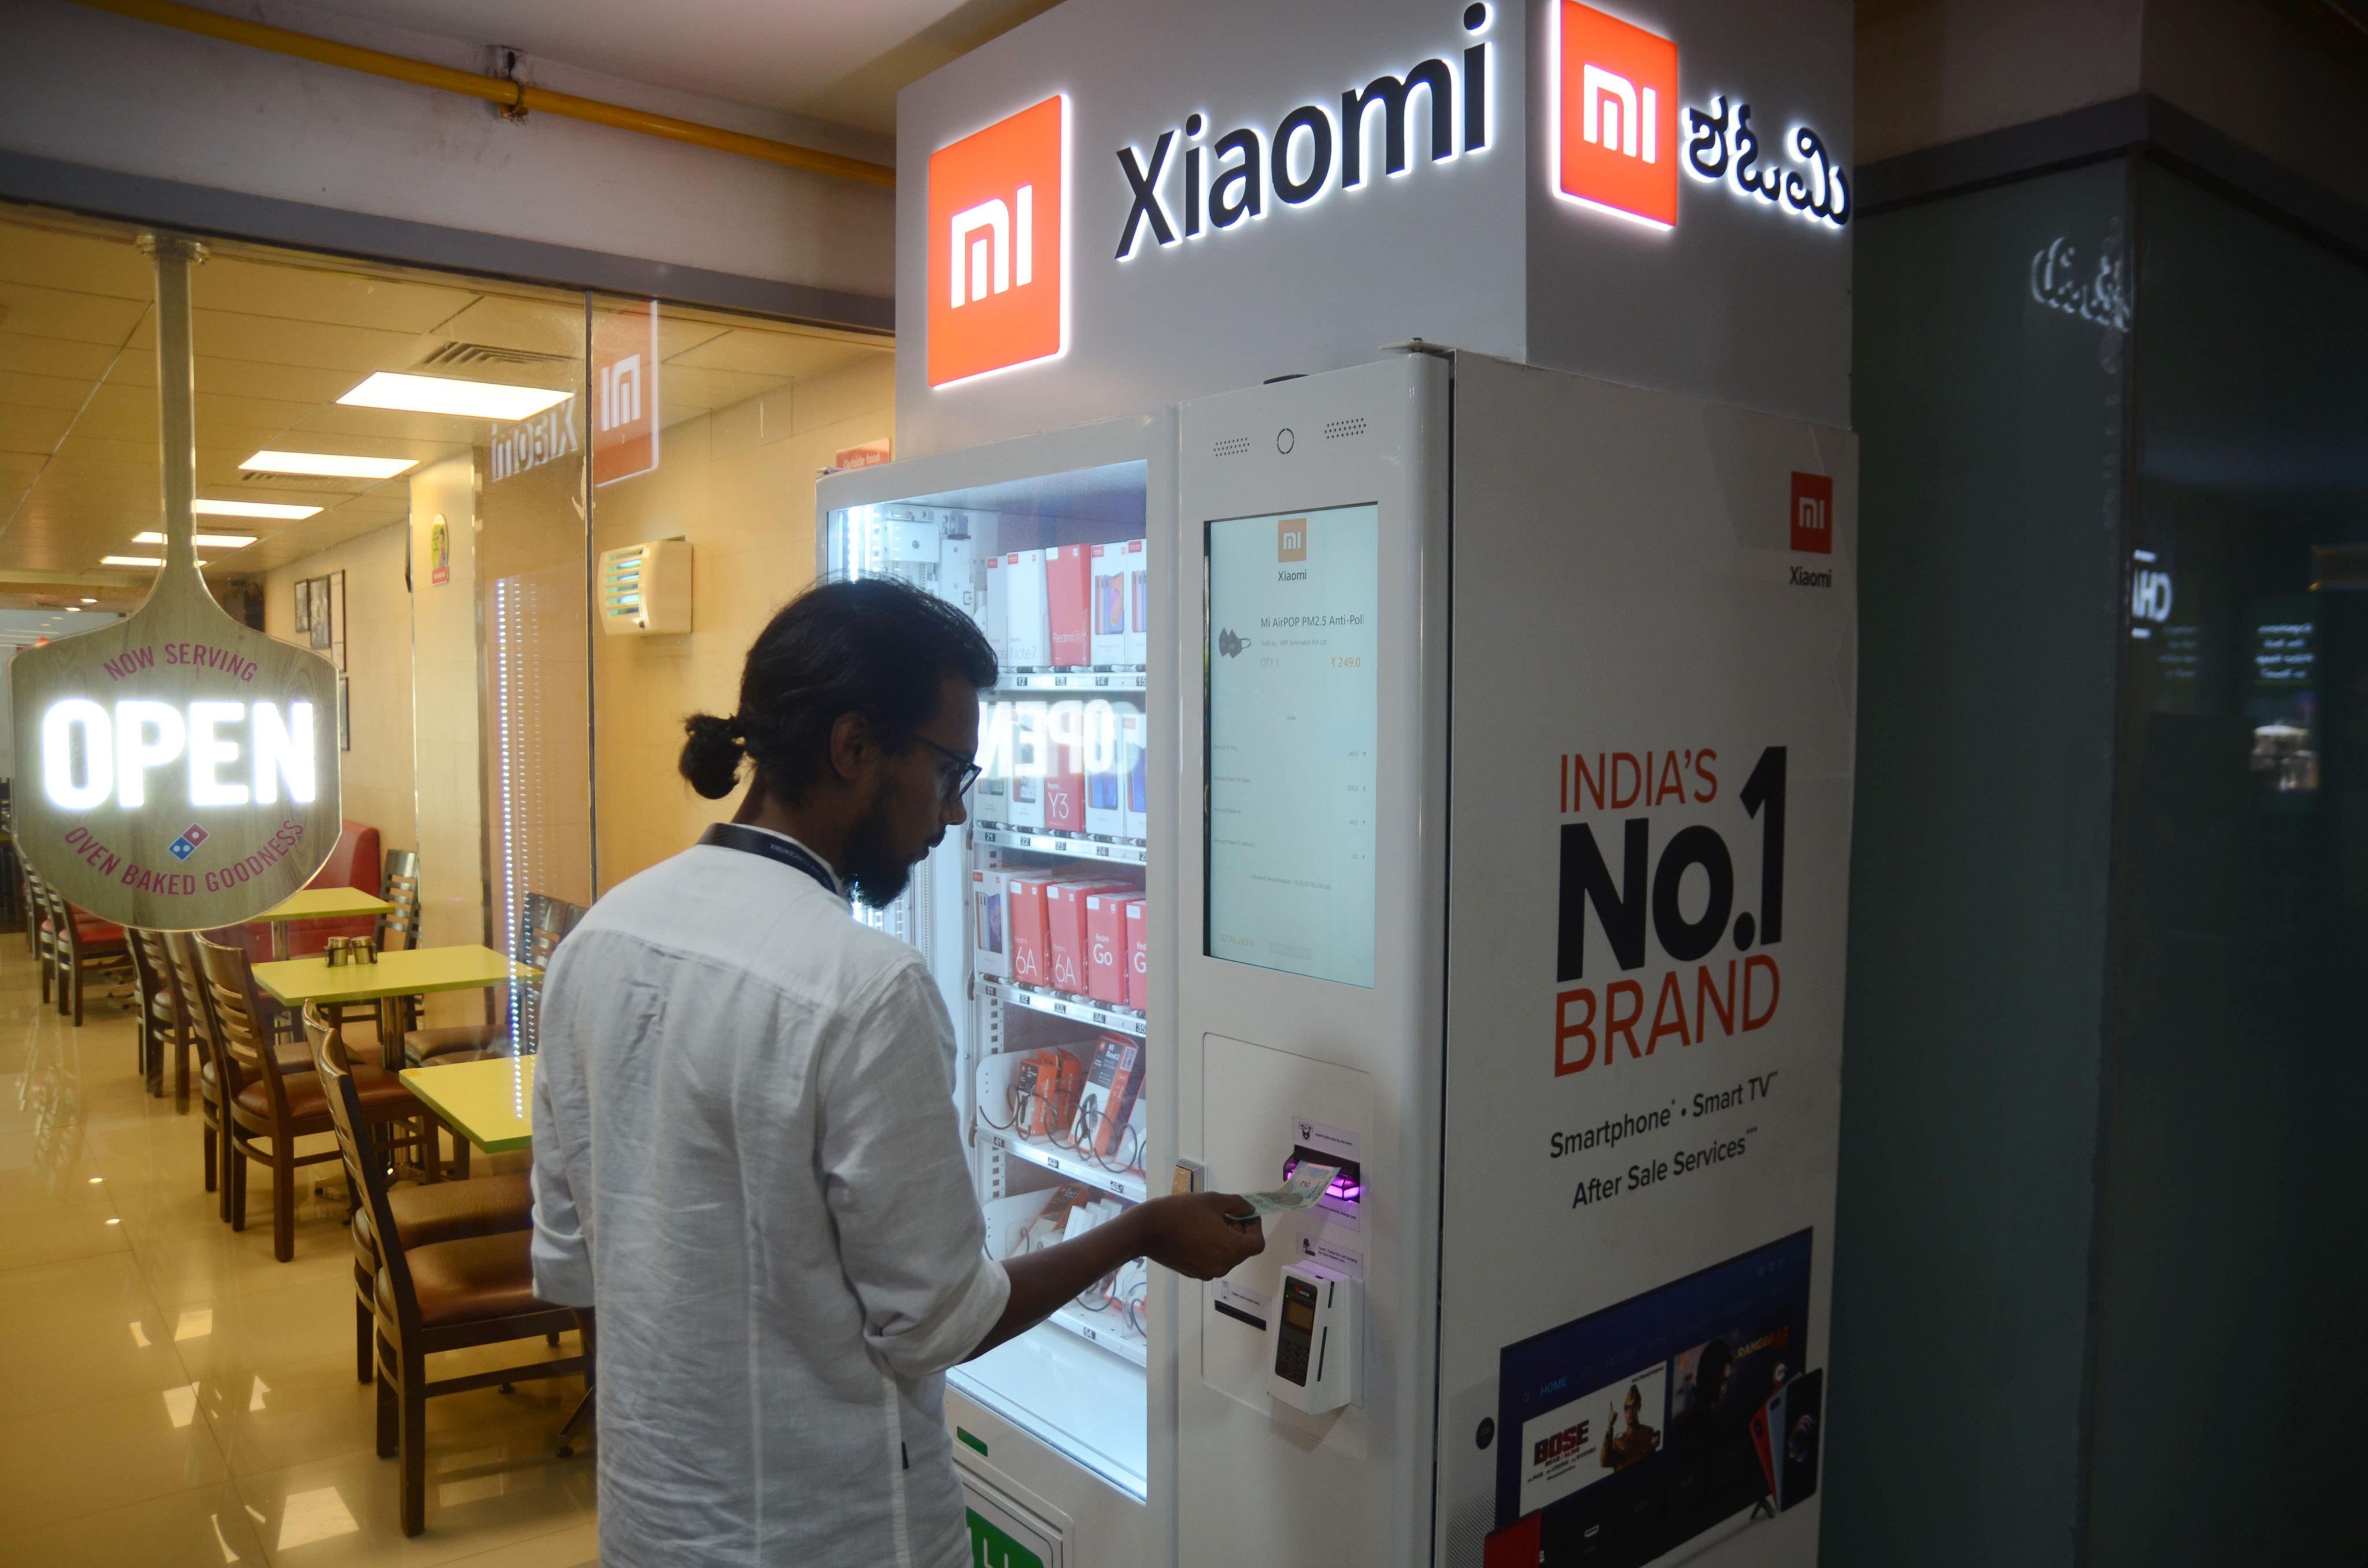 A customer at a Mi Express Kiosk in Bangalore on May 18, 2019, part of an initiative by Xiaomi to sell its smartphones and mobile accessories through vending machines. Photo: Xinhua